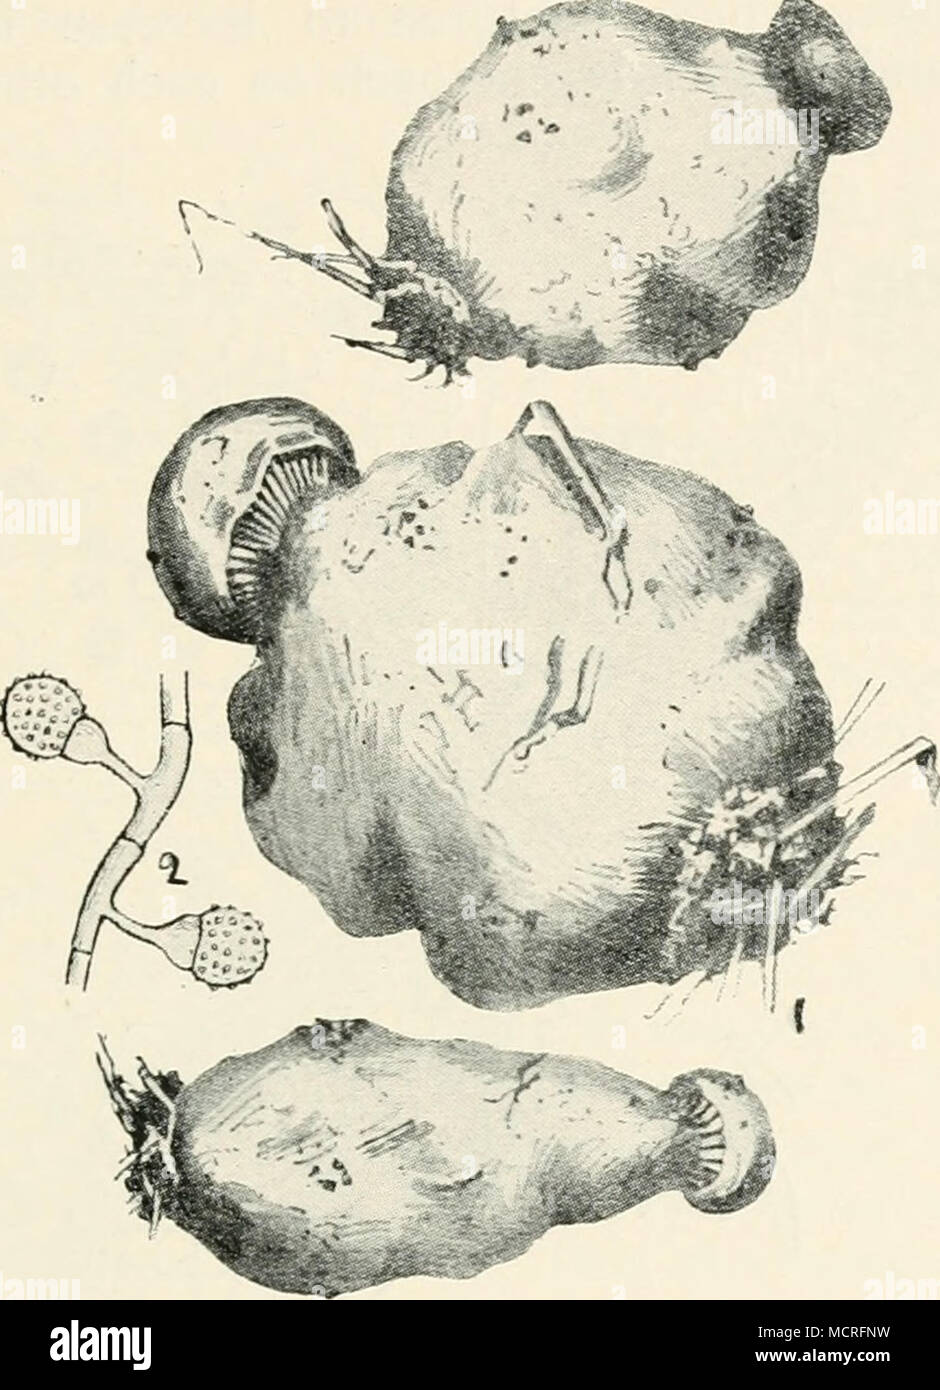 . Fig. 51.—Hypomyces perniciosKs. i, mushrooms deformed by the fungus, half nat. size ; 2, conidia of the fungus, highly mag. gallons of water; this should be repeated twice at an interval of about three weeks. Jour71. Bd. Agric. Leaflet, No. 139. Magnus, Verh. Ges. Deutsch. nat. u. Aerzte, 60, p. 246. Stapf, Verh. zool.-hot. Geseli., 39. p. 617. SPHAERELLA (Ces. and De Not.) Perithecia membranaceous, subglobose or depressed, covered by the epidermis or bursting through ; asci 8-spored ; spores elongated, i-septate, hyaline; paraphyses absent. N Stock Photo